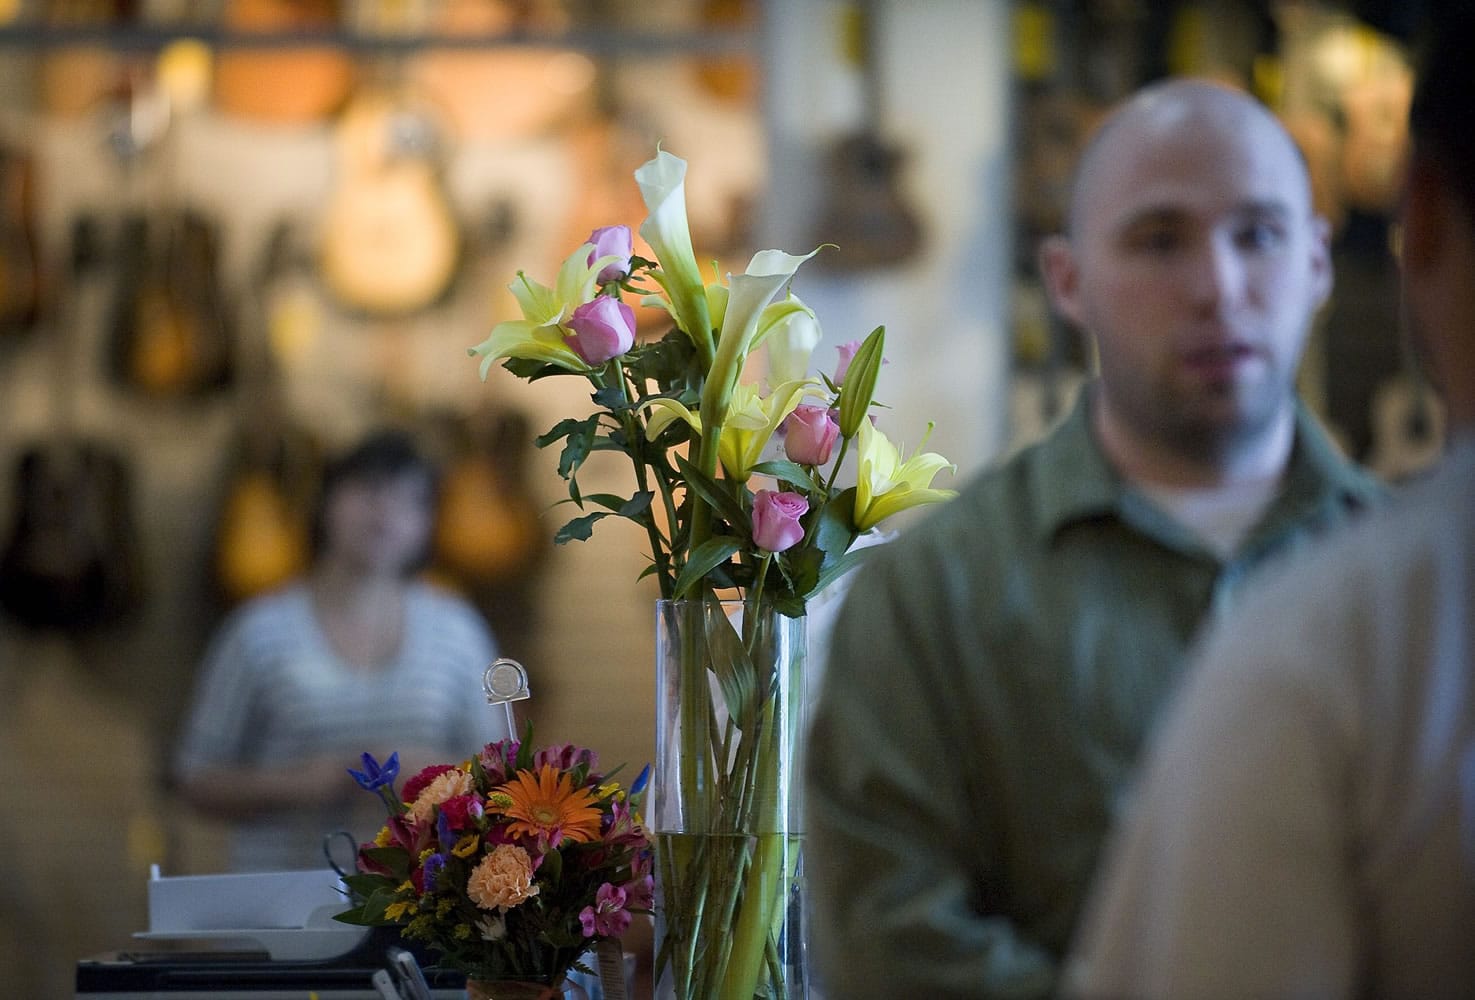 Flowers sit behind the register Friday while sales clerk Ryan Green, right, explains to a customer that Beacock Music Founder Dale Beacock was killed on Thursday in a bicycle accident near Garibaldi, Ore.